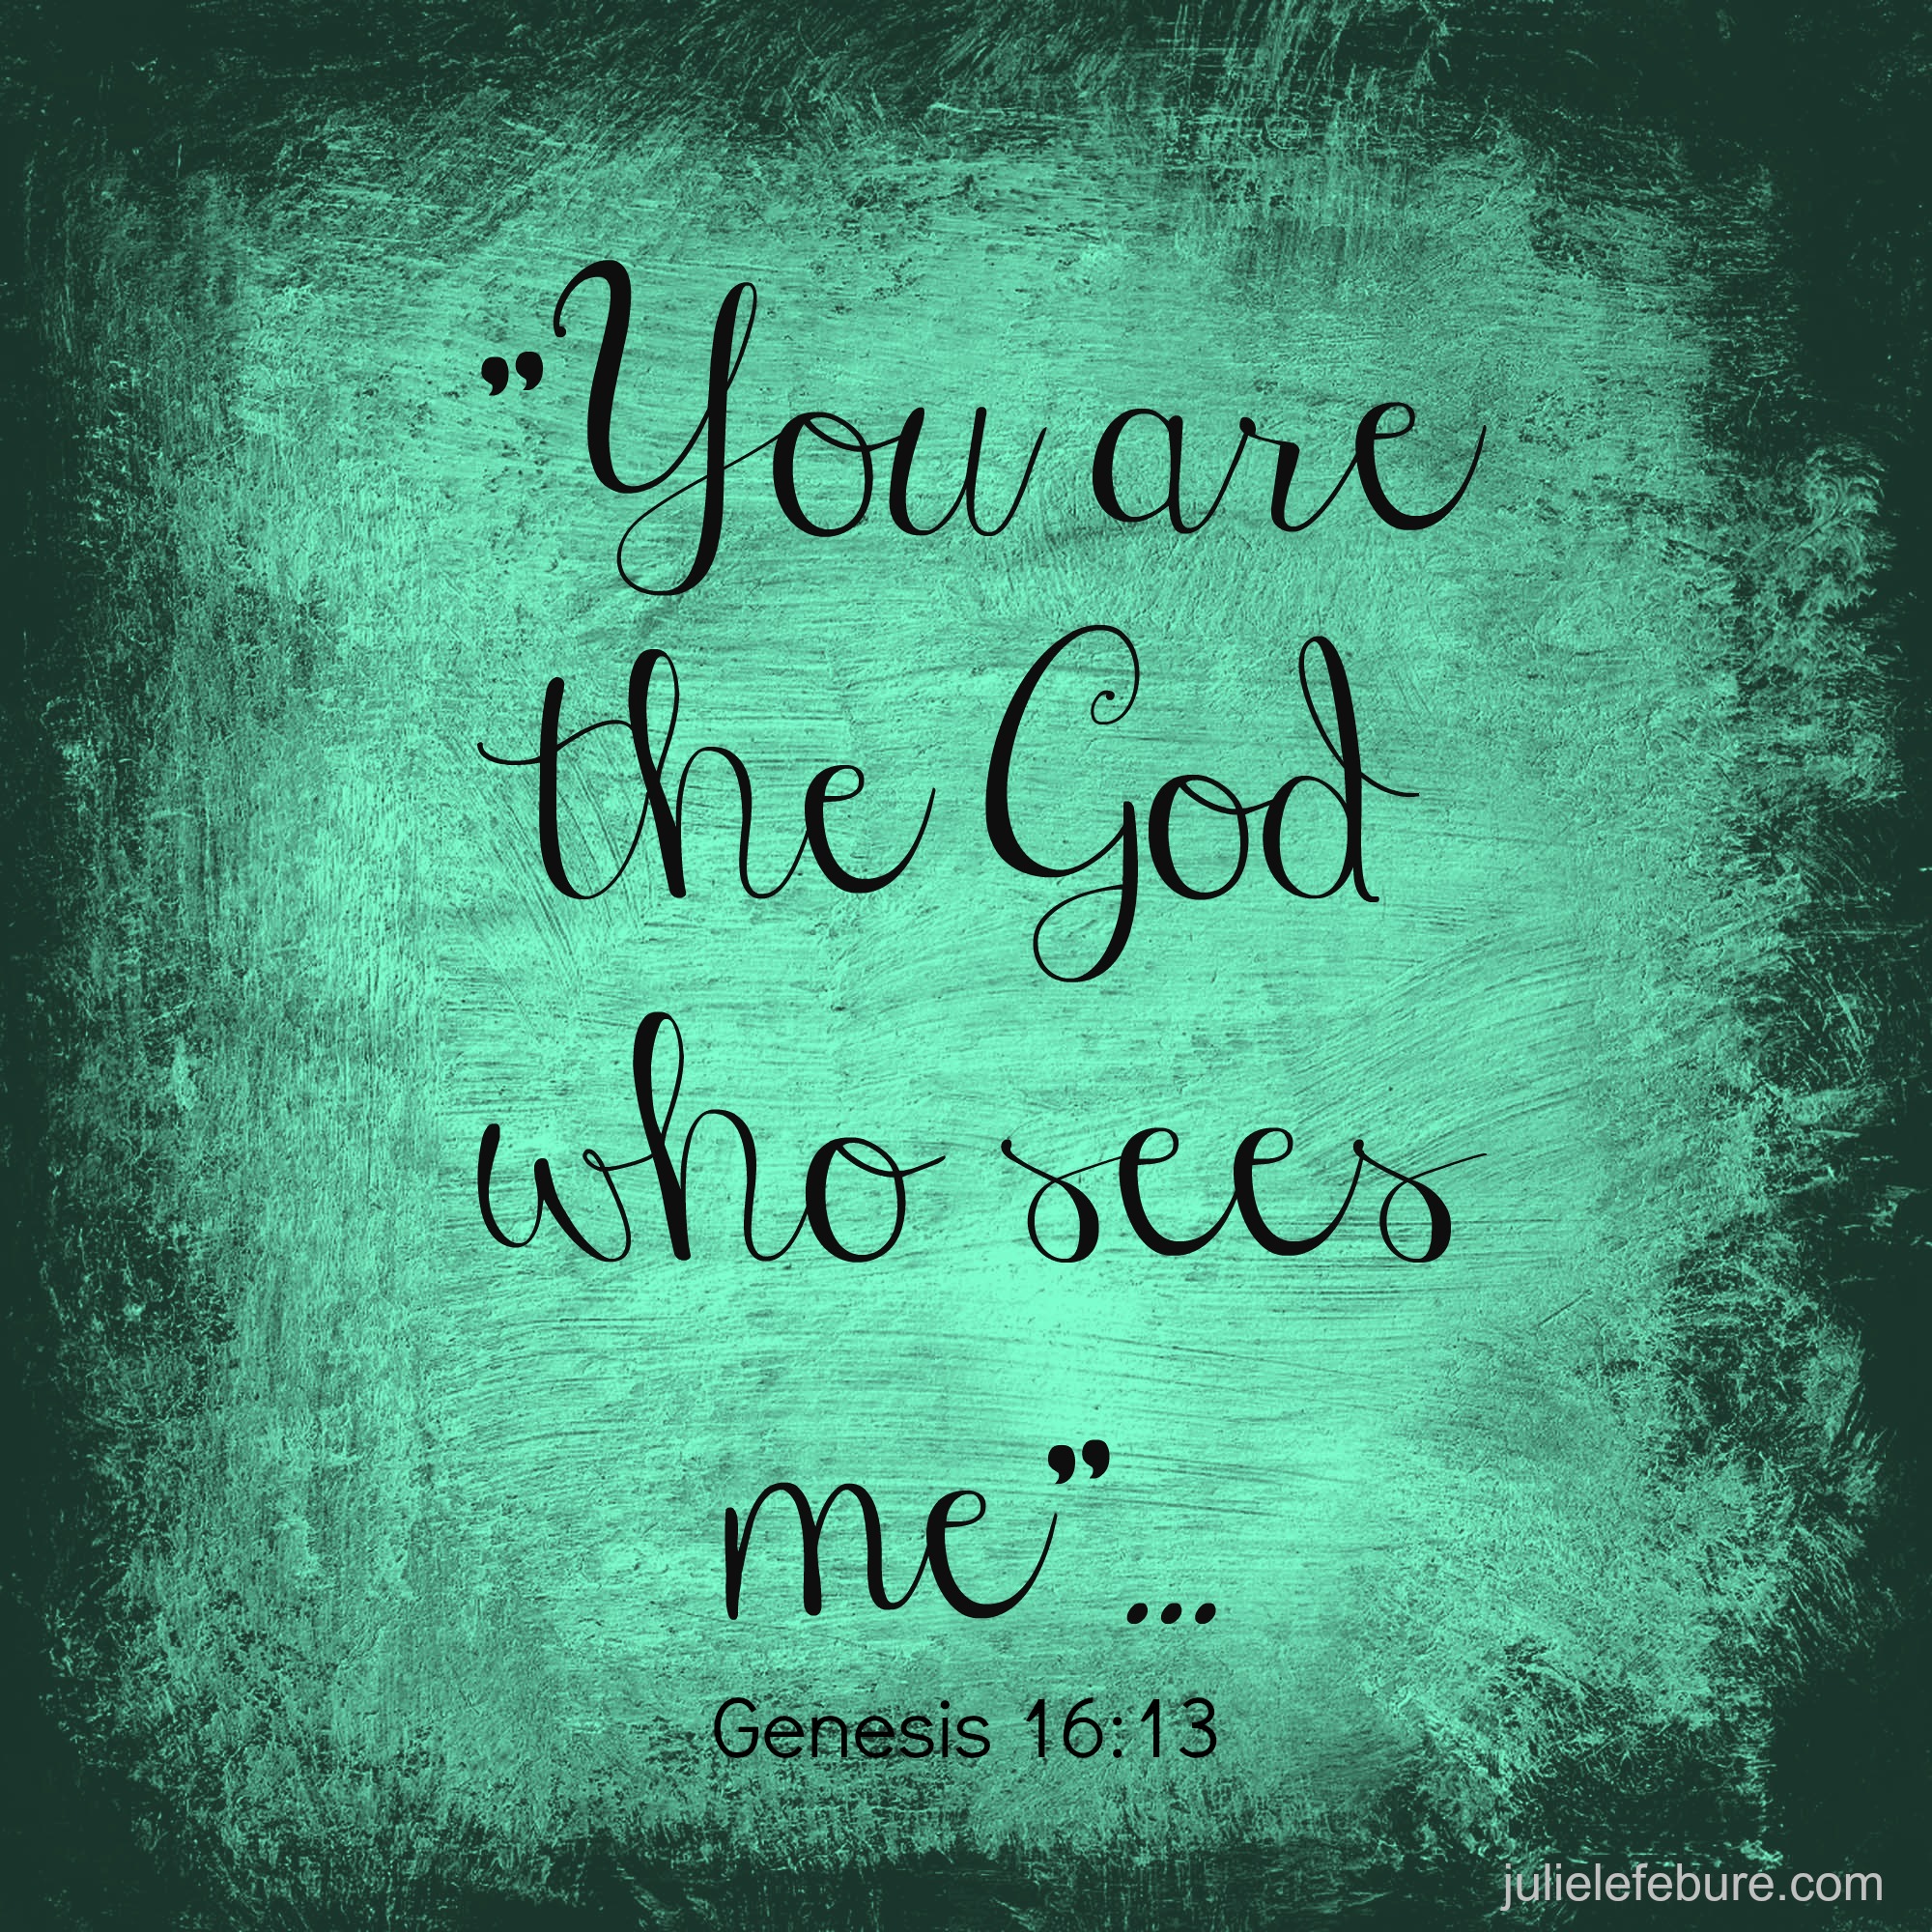 The God Who Sees Us